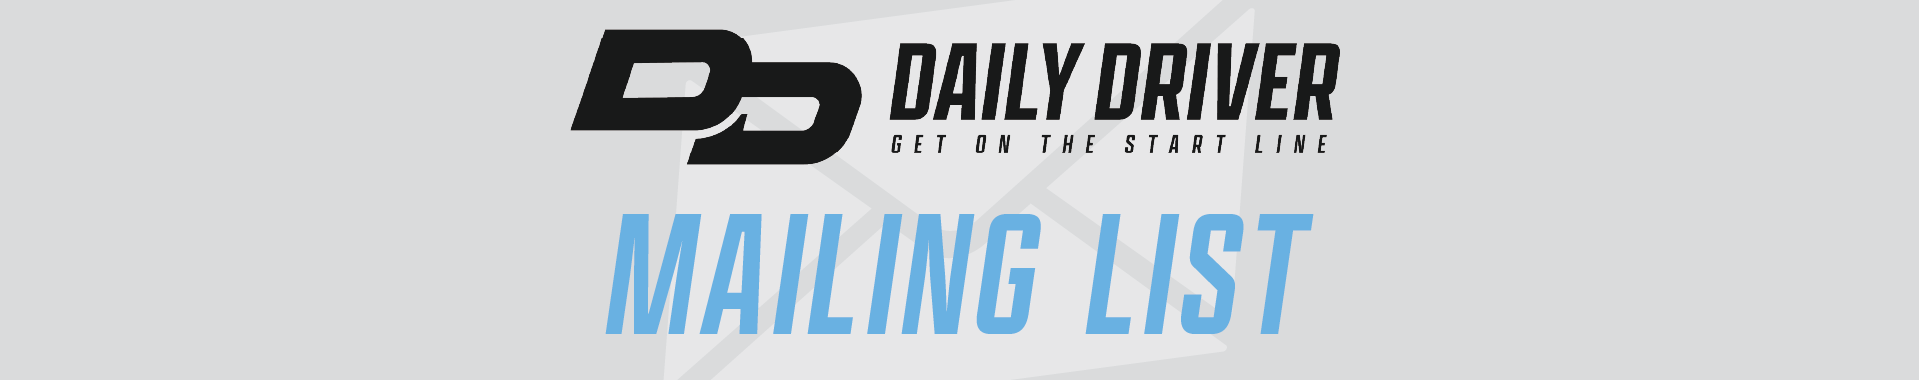 DailyDriver Mailing list